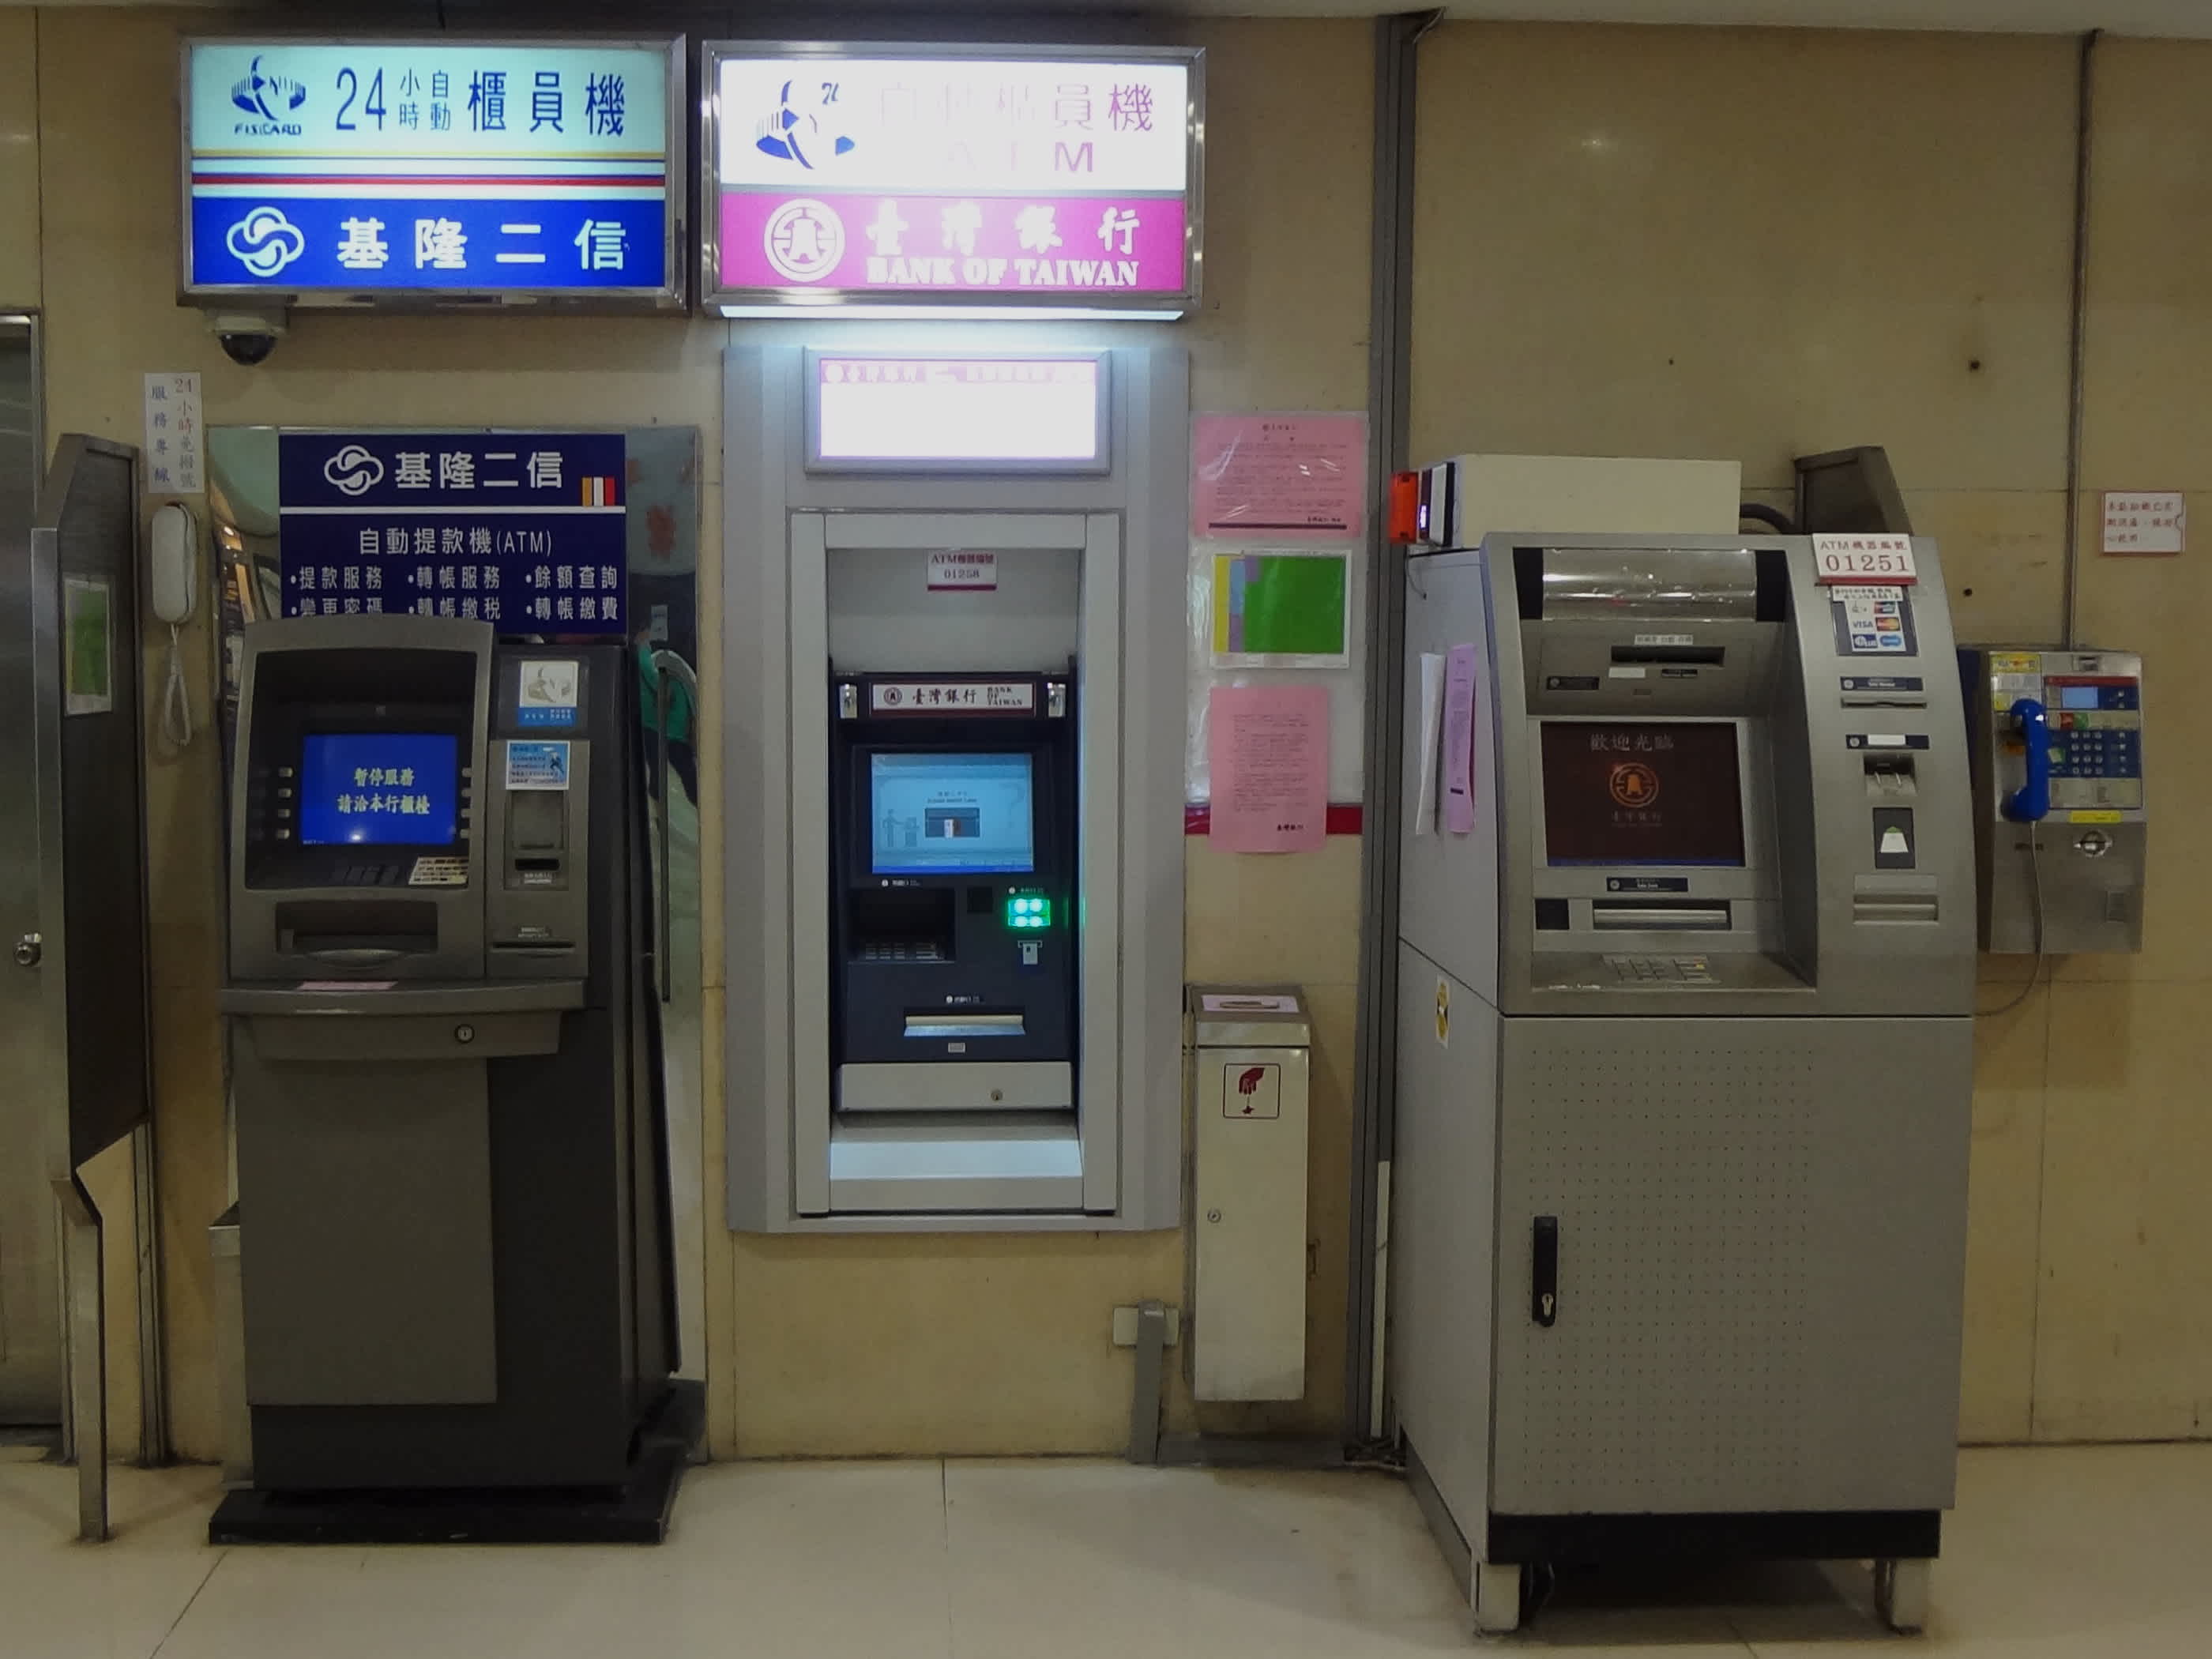 2020/05/KSCC_ATM_BOT_ATM_and_CHT_public_telephone_in_Keelung_Chang_Gung_Memorial_Hospital_1F_20170624-scaled.jpg